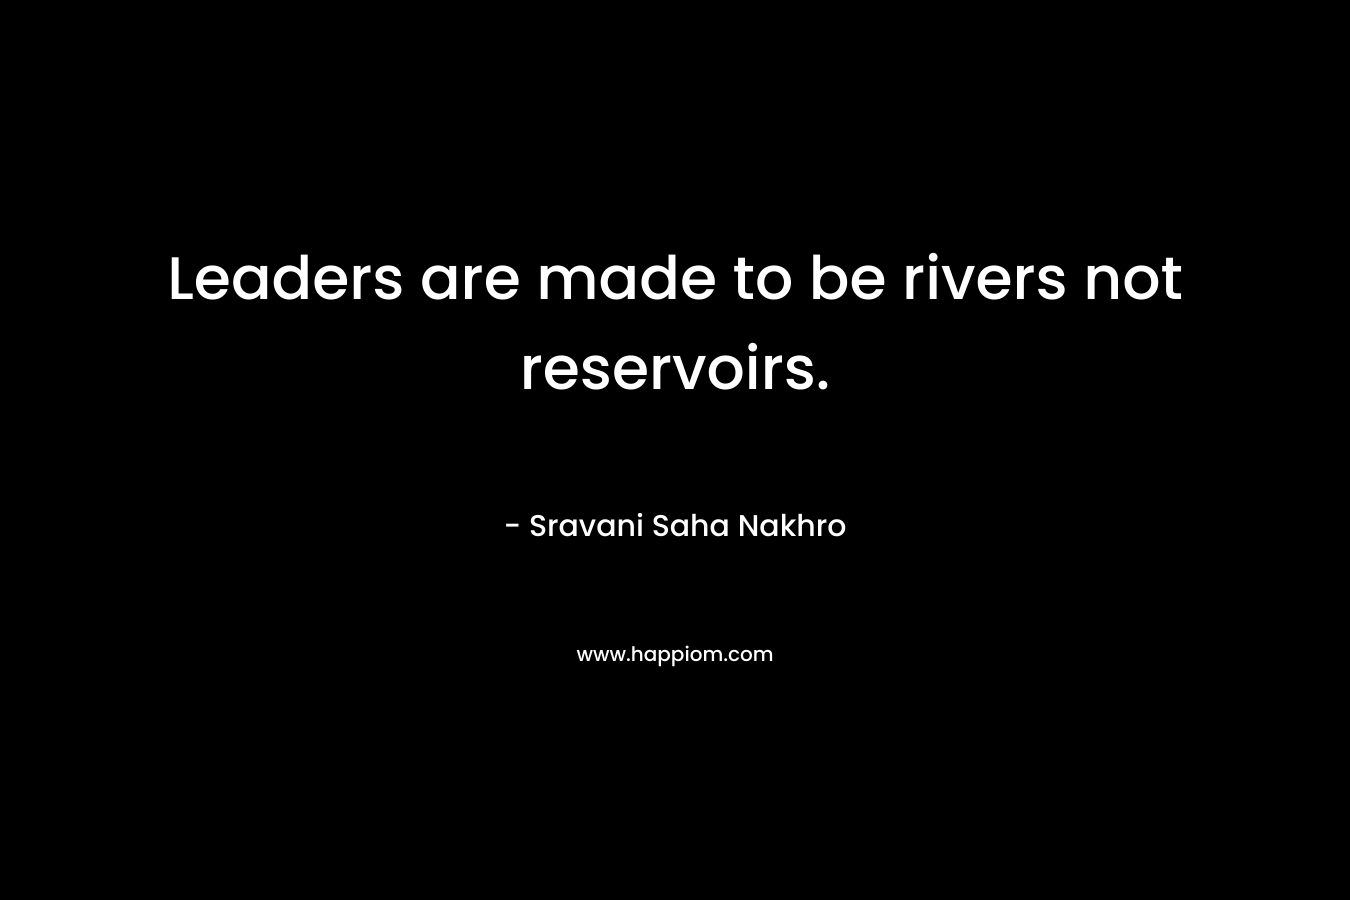 Leaders are made to be rivers not reservoirs.